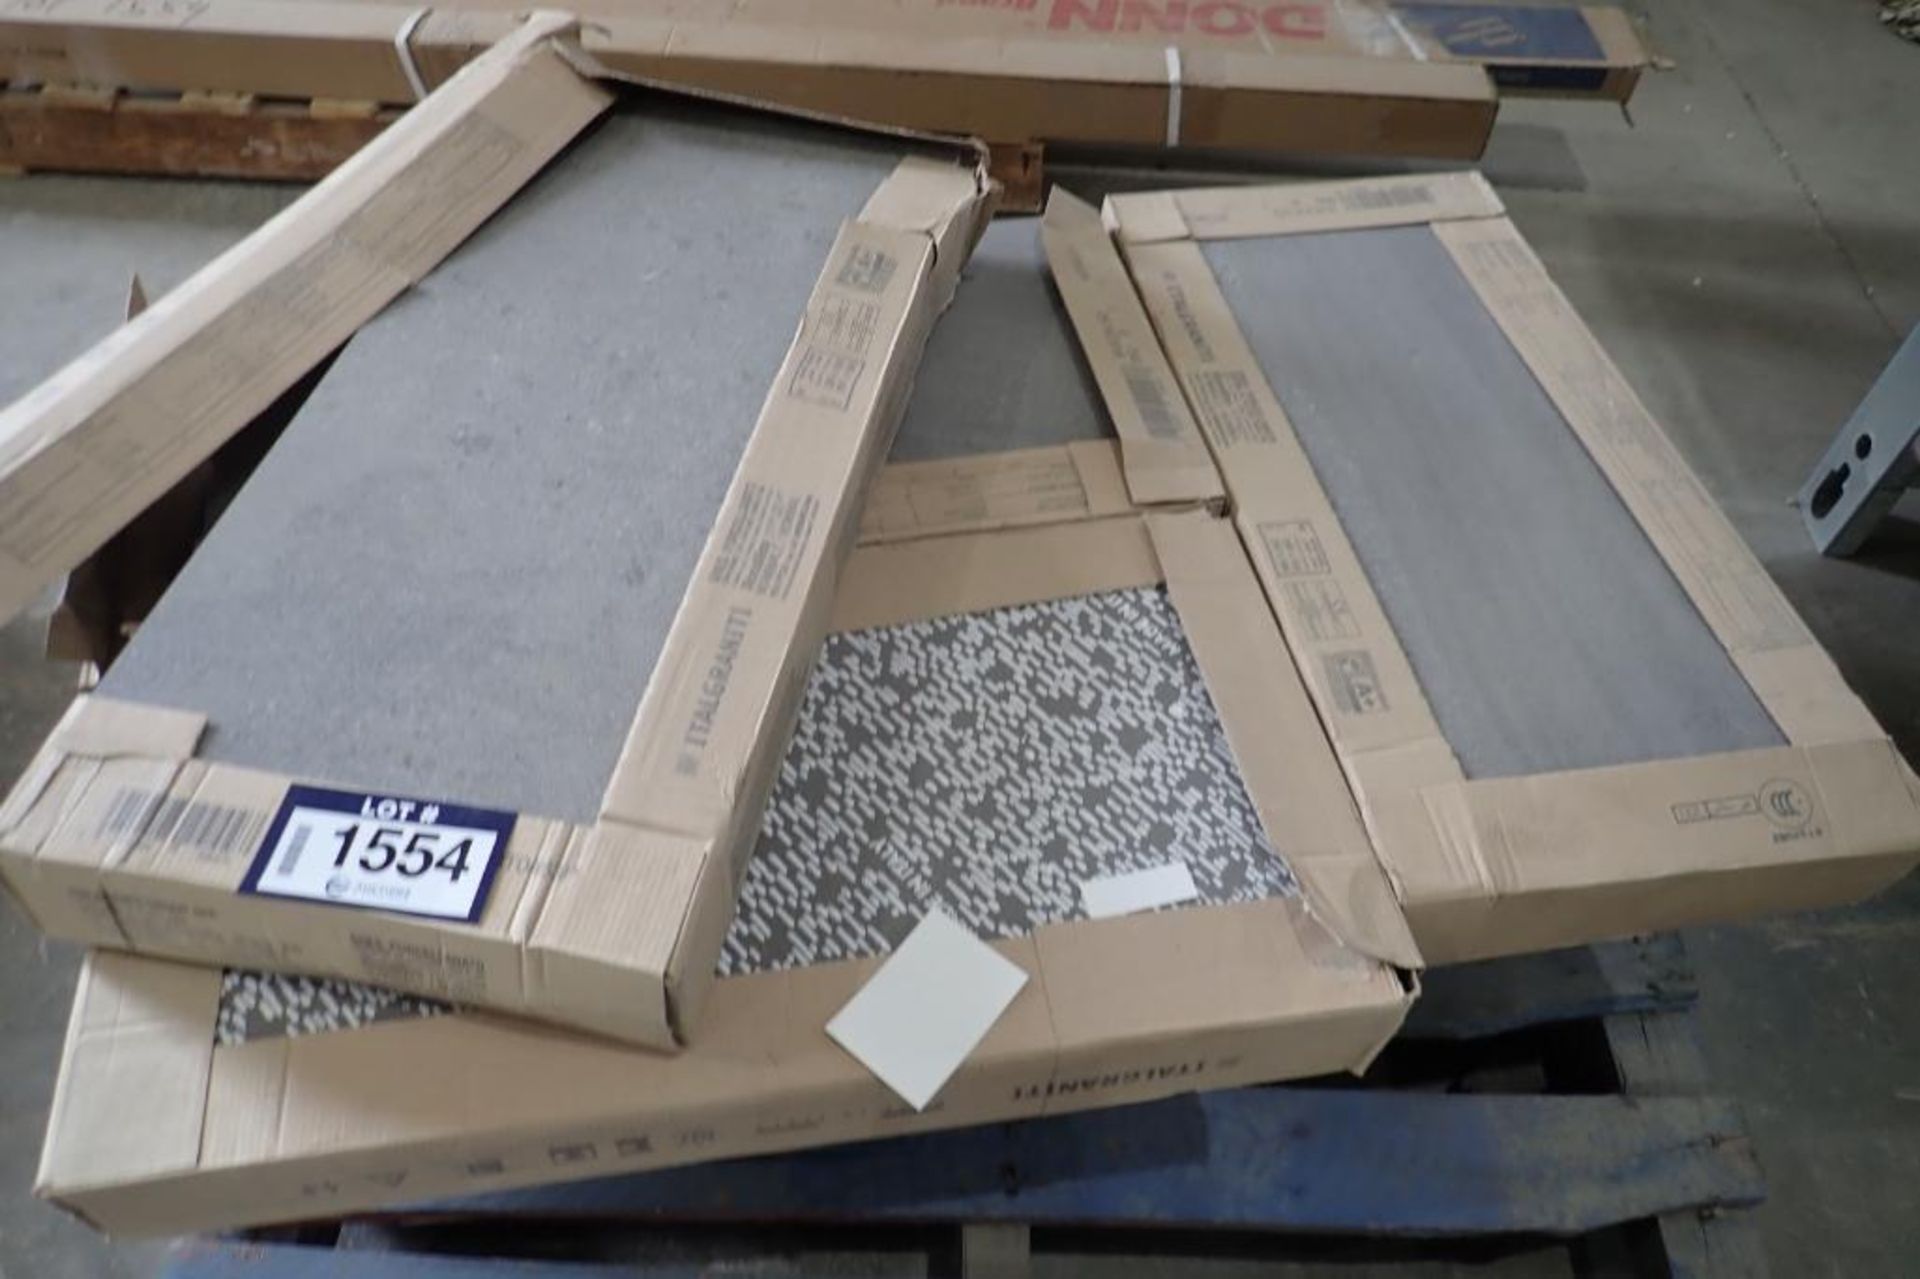 Lot of Asst. Flooring, Doors, Threaded Rod, Heavy Duty Nuts and Bolts, Galvanized Sheeting, Donn Cei - Image 2 of 7